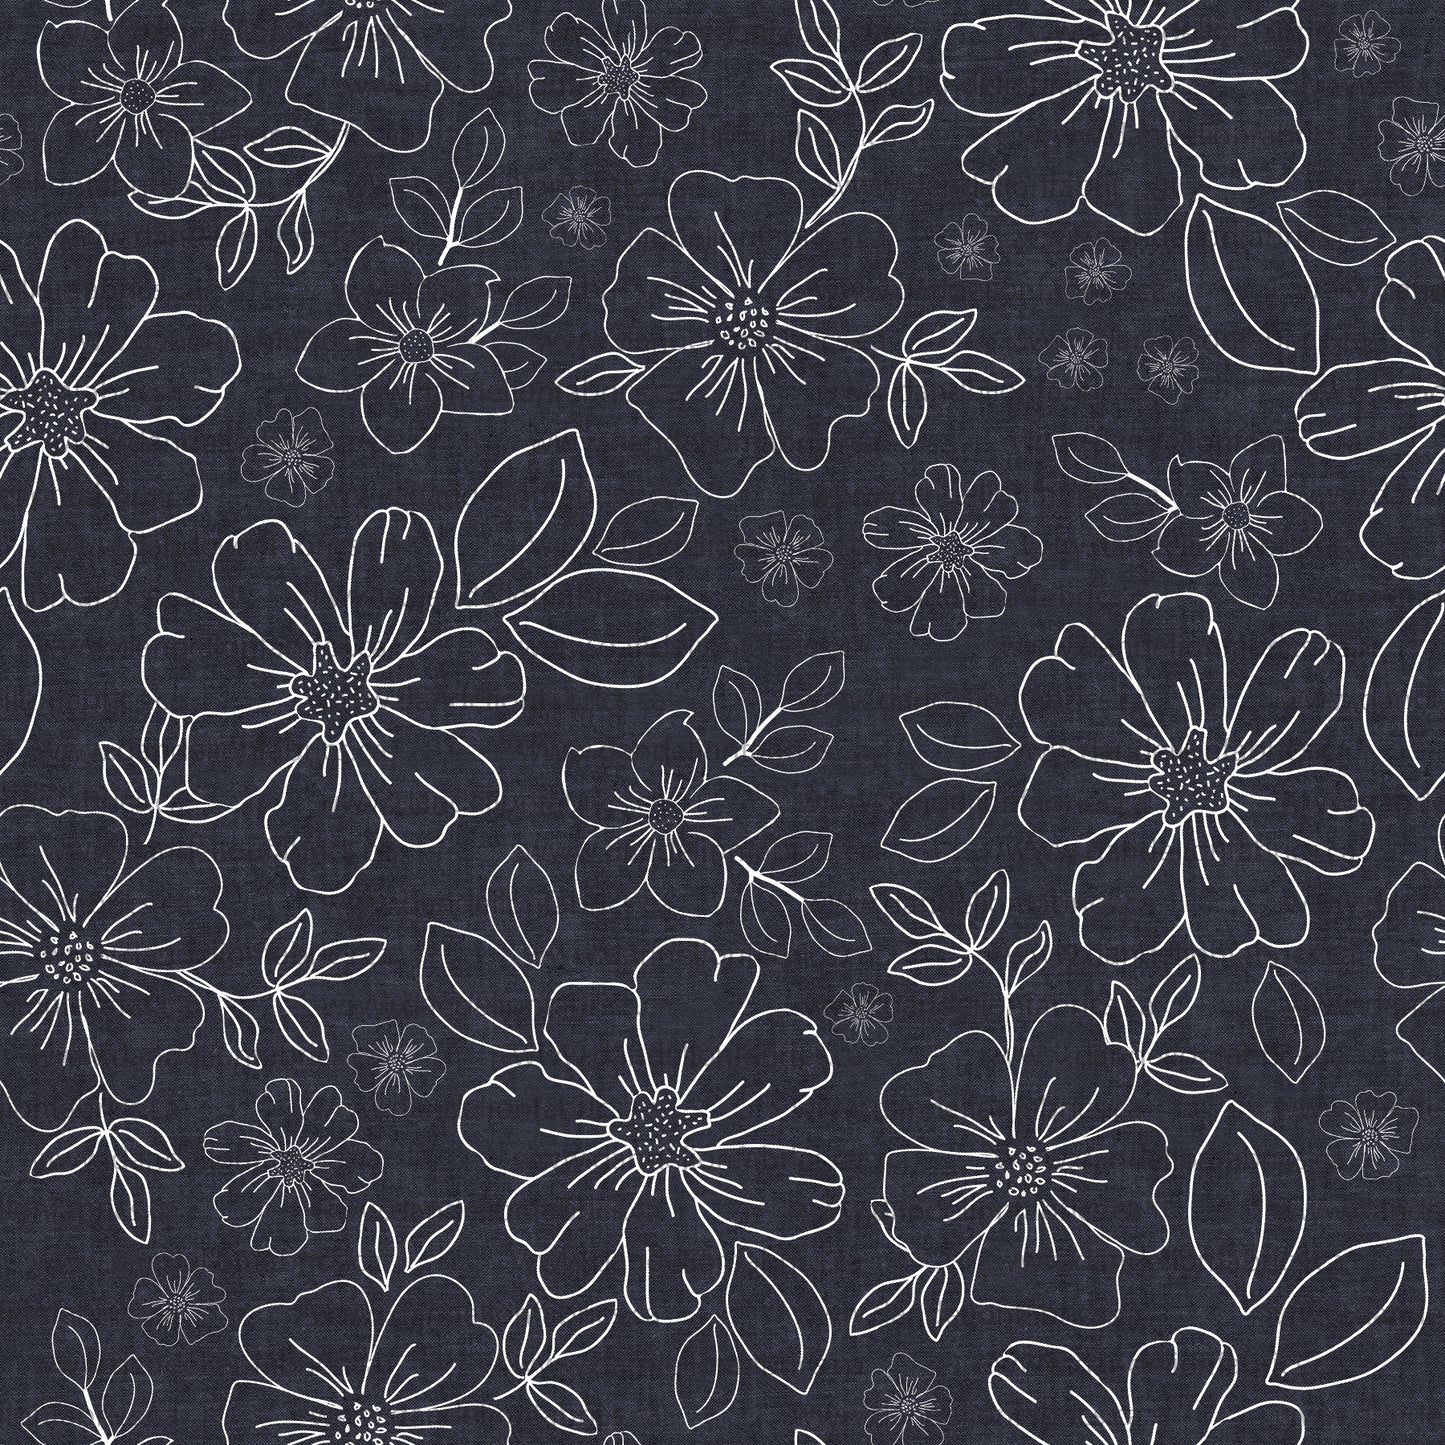 Serenity Floral in Polar Night Navy | Unbrushed Rib Knit Fabric | SOLD BY THE FULL BOLT